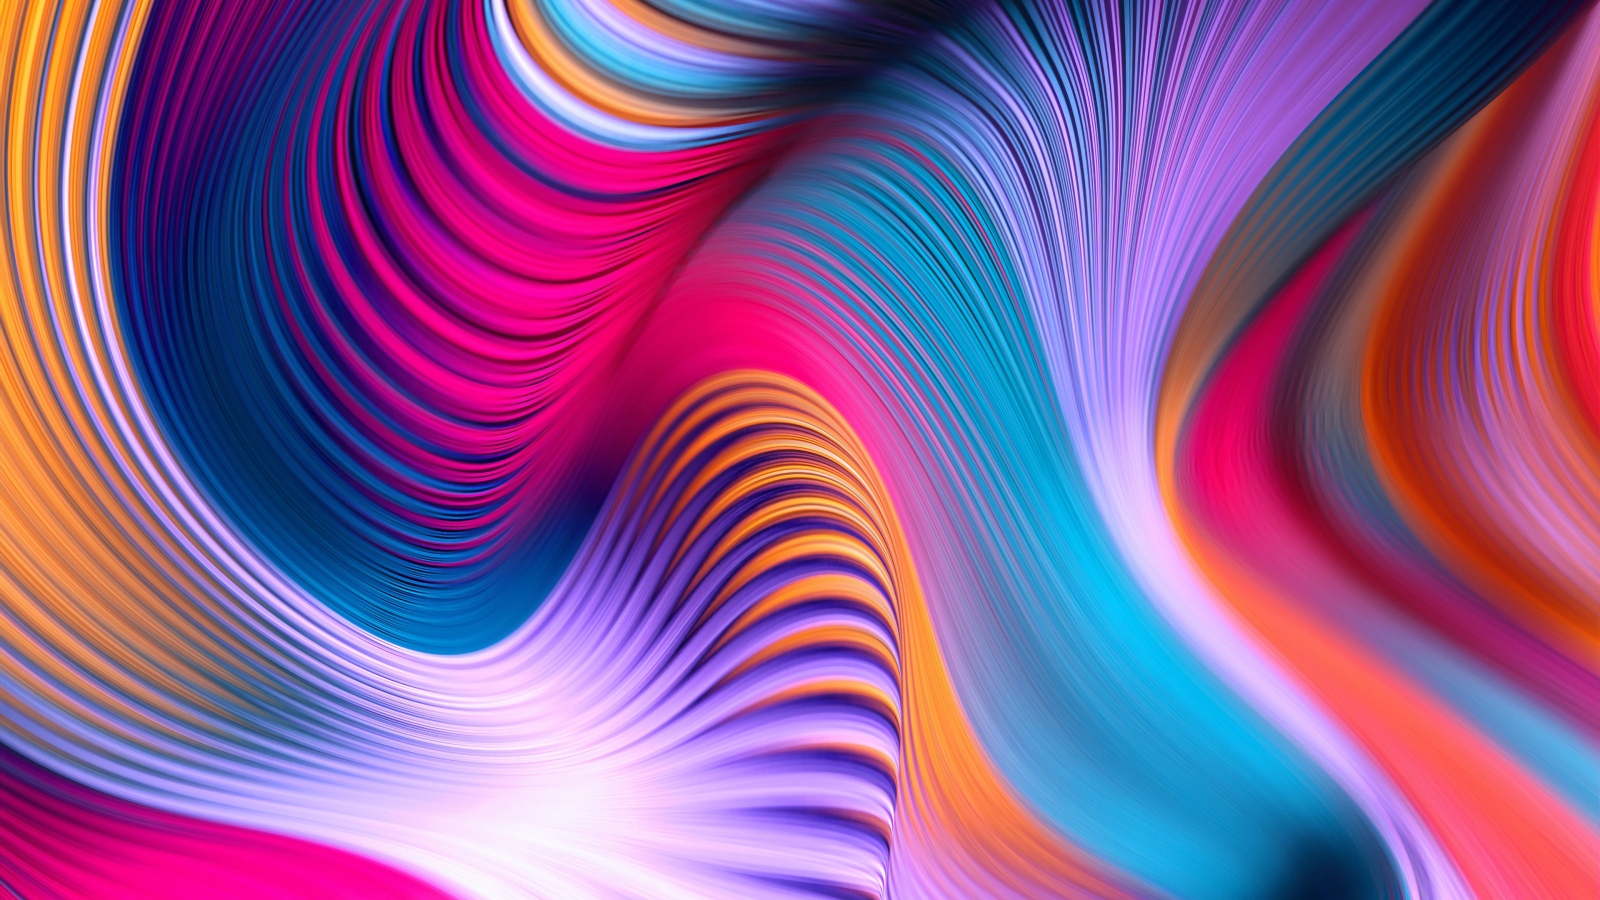 Download wallpaper 1600x900 colorful, abstract, art, waves, 16:9 ...